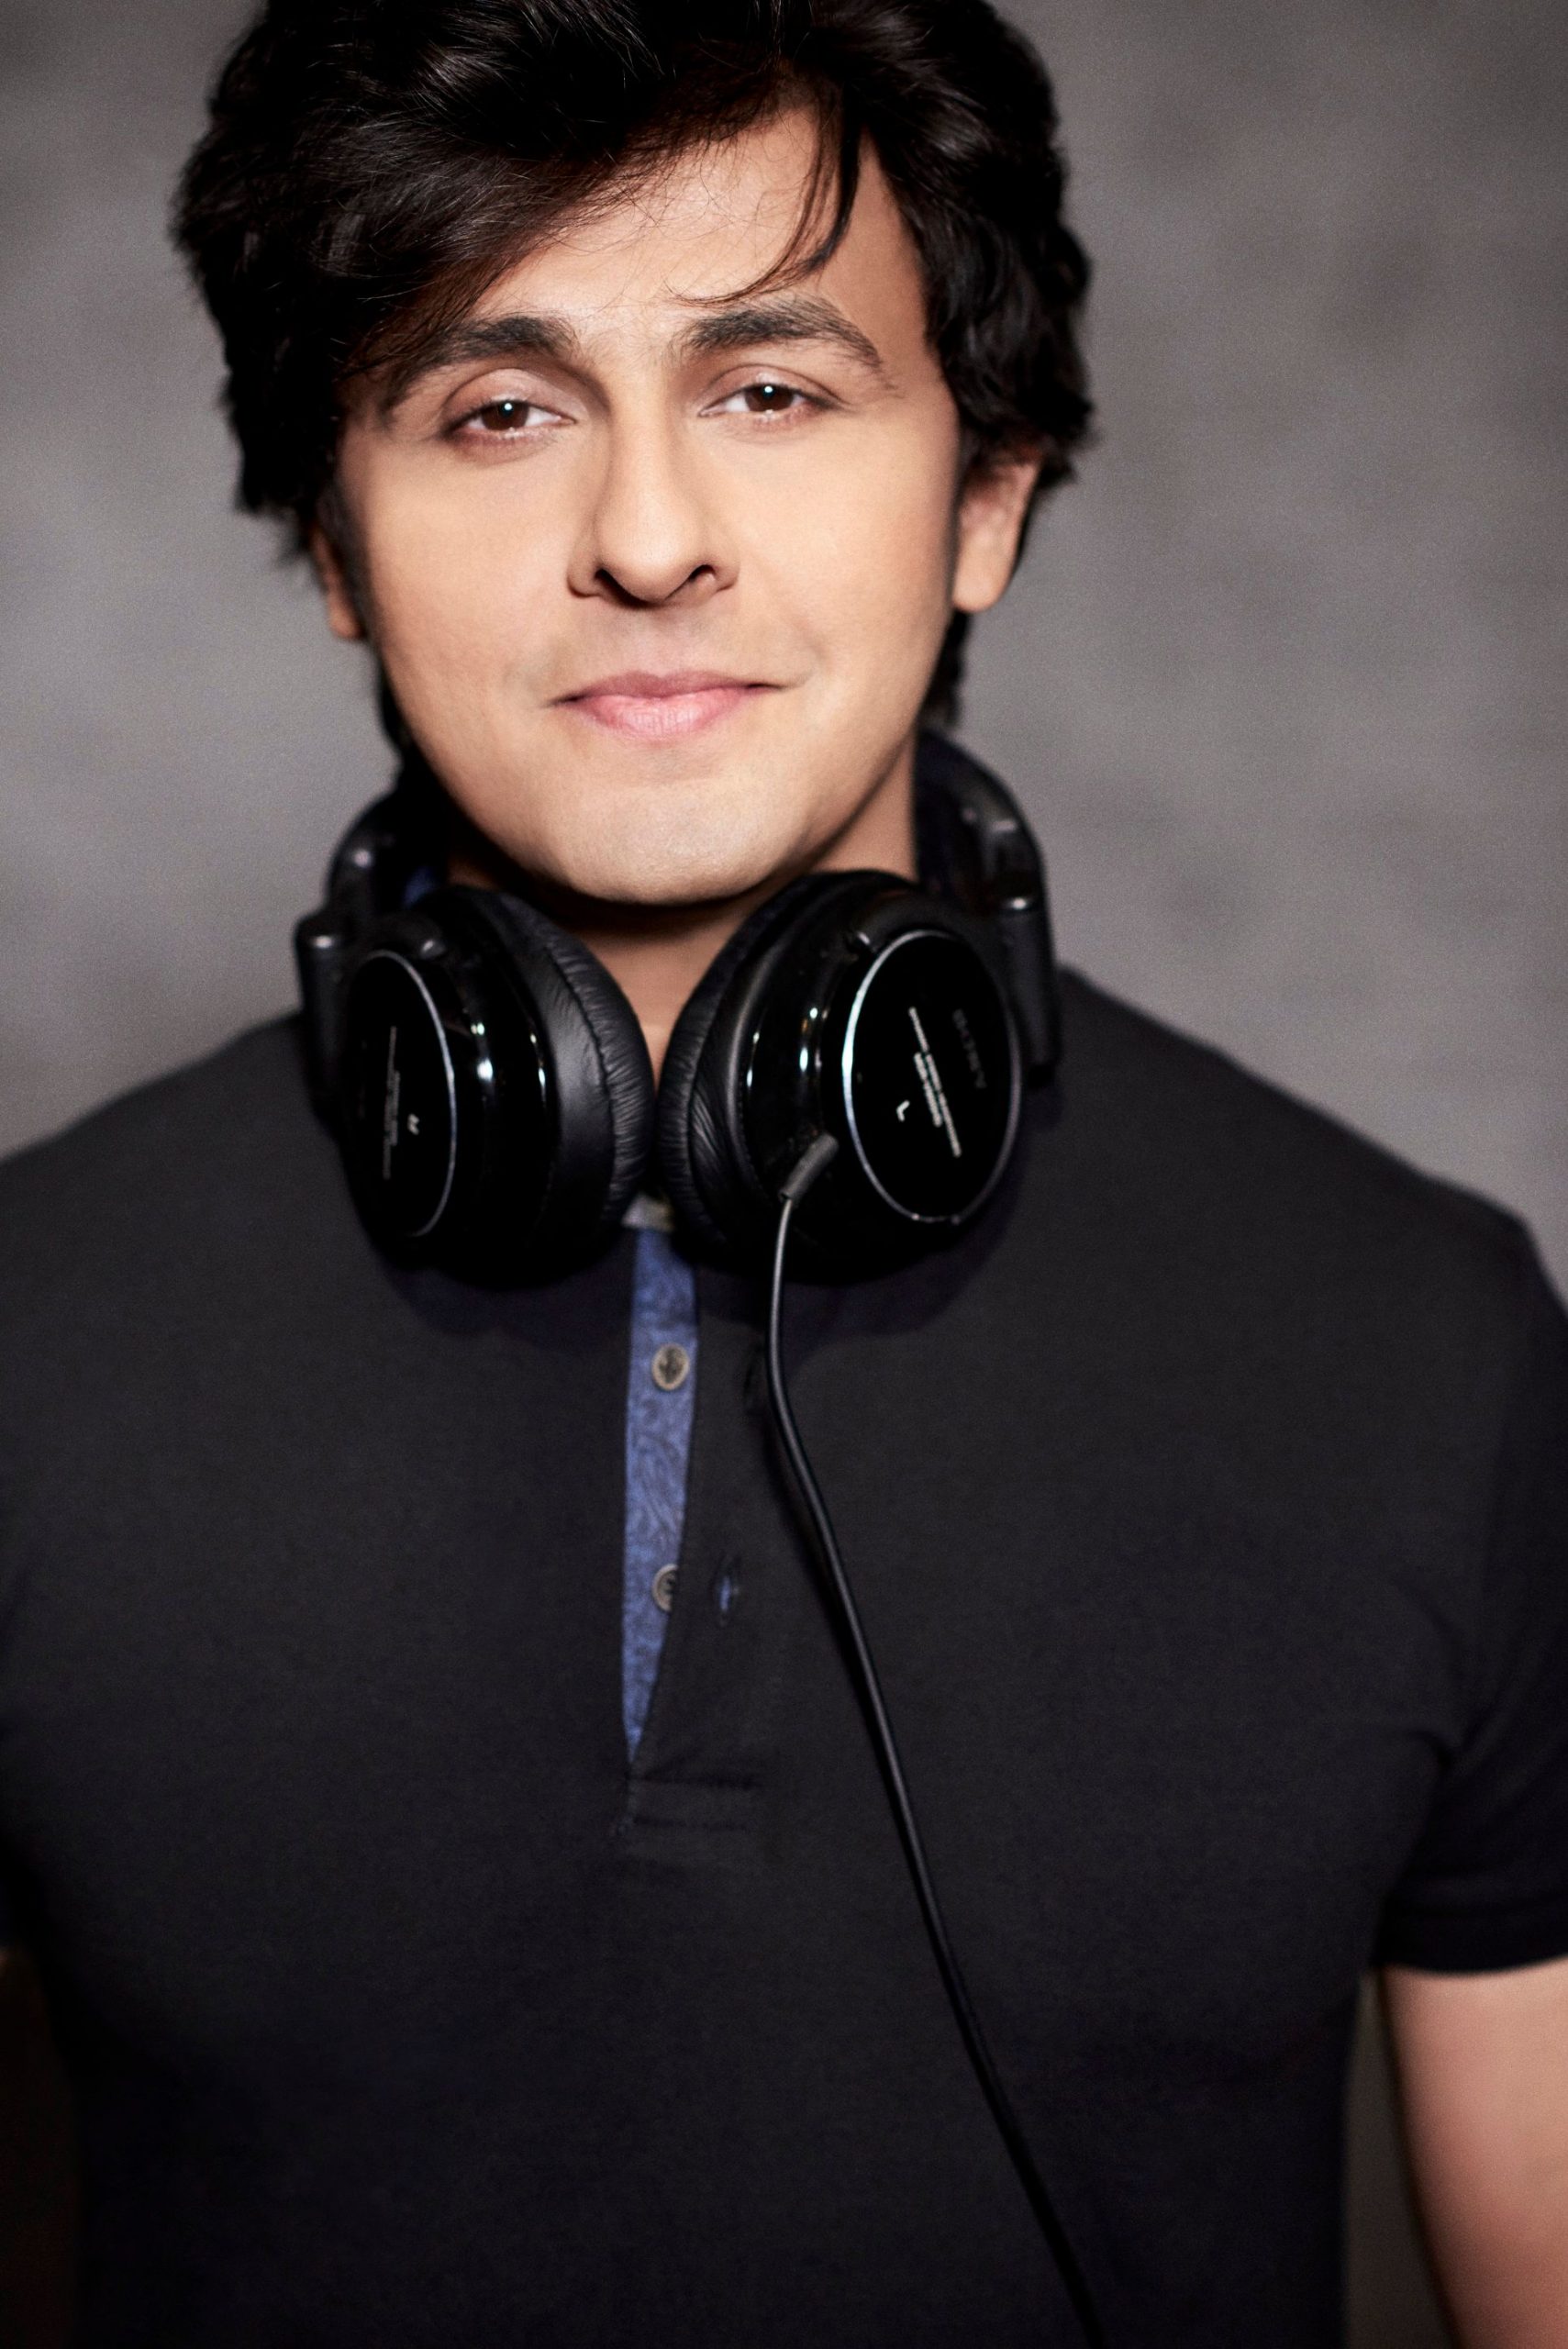 Sonu Nigam Talks About Singing For Shah Rukh Khan In Raees And More